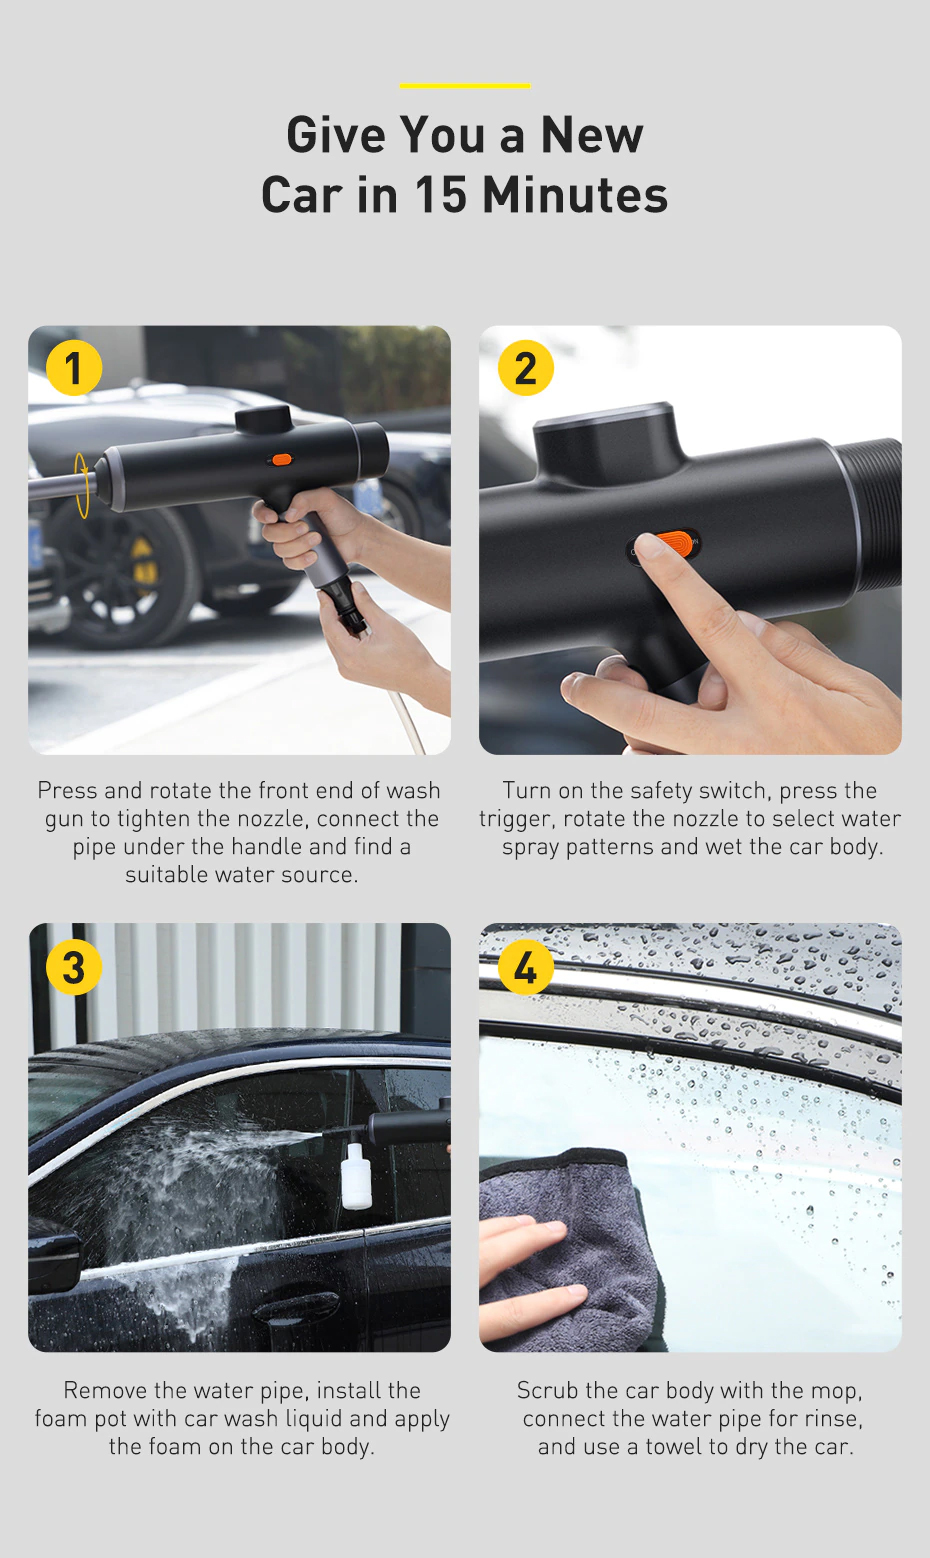 Press and rotate the front end of wash gun to tighten the nozzle. connect the pipe under the handle and find a suitable water source.